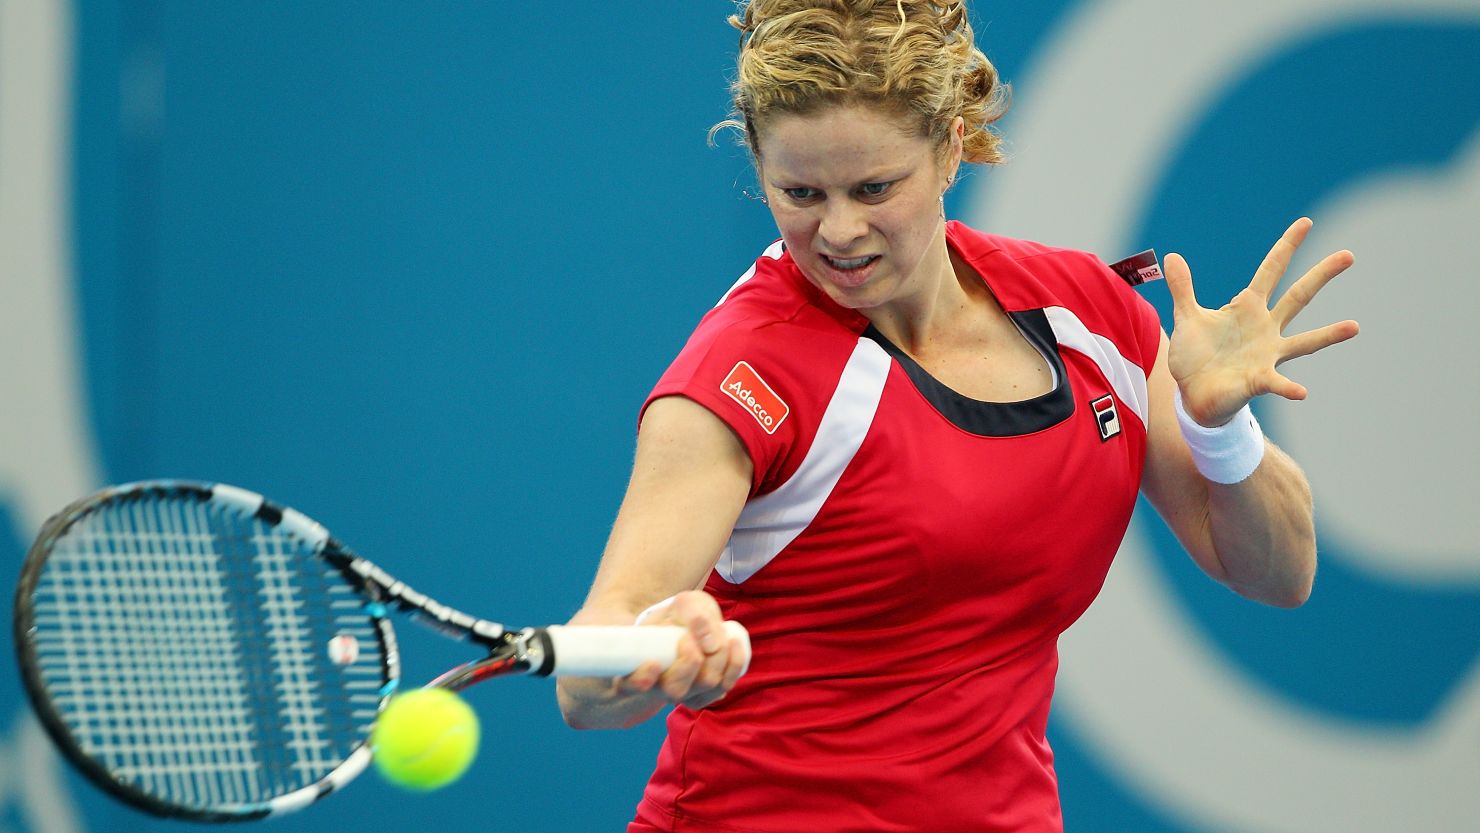 Kim Clijsters plays a return during her straight sets win over Simona Halep in Brisbane.